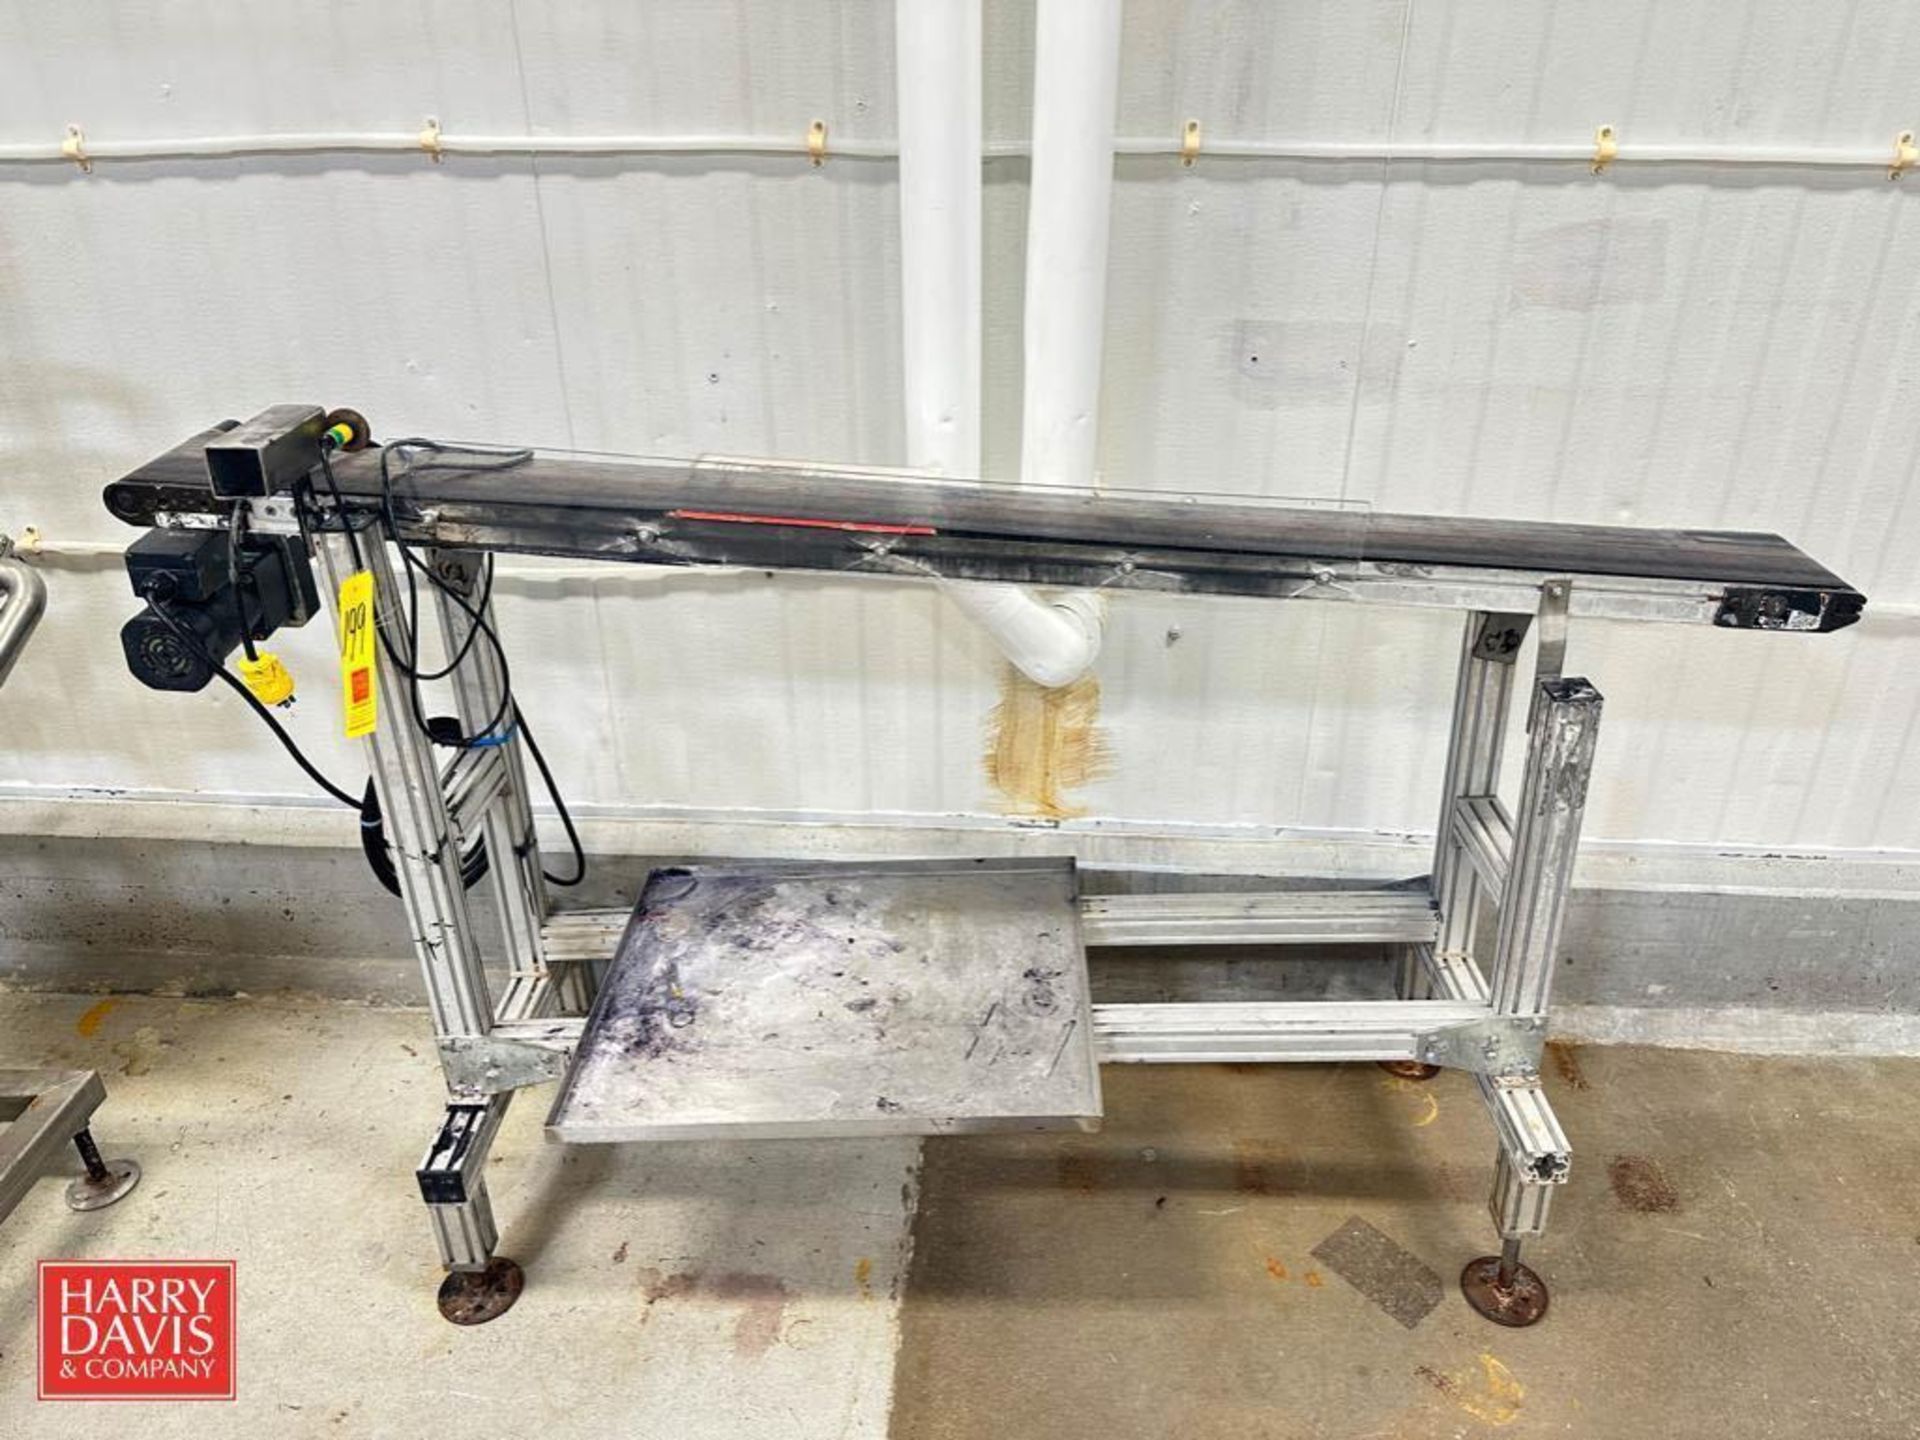 Dorner Portable Power Belt Conveyor: 6’ Length with Drive and Incline - Rigging Fee: $200